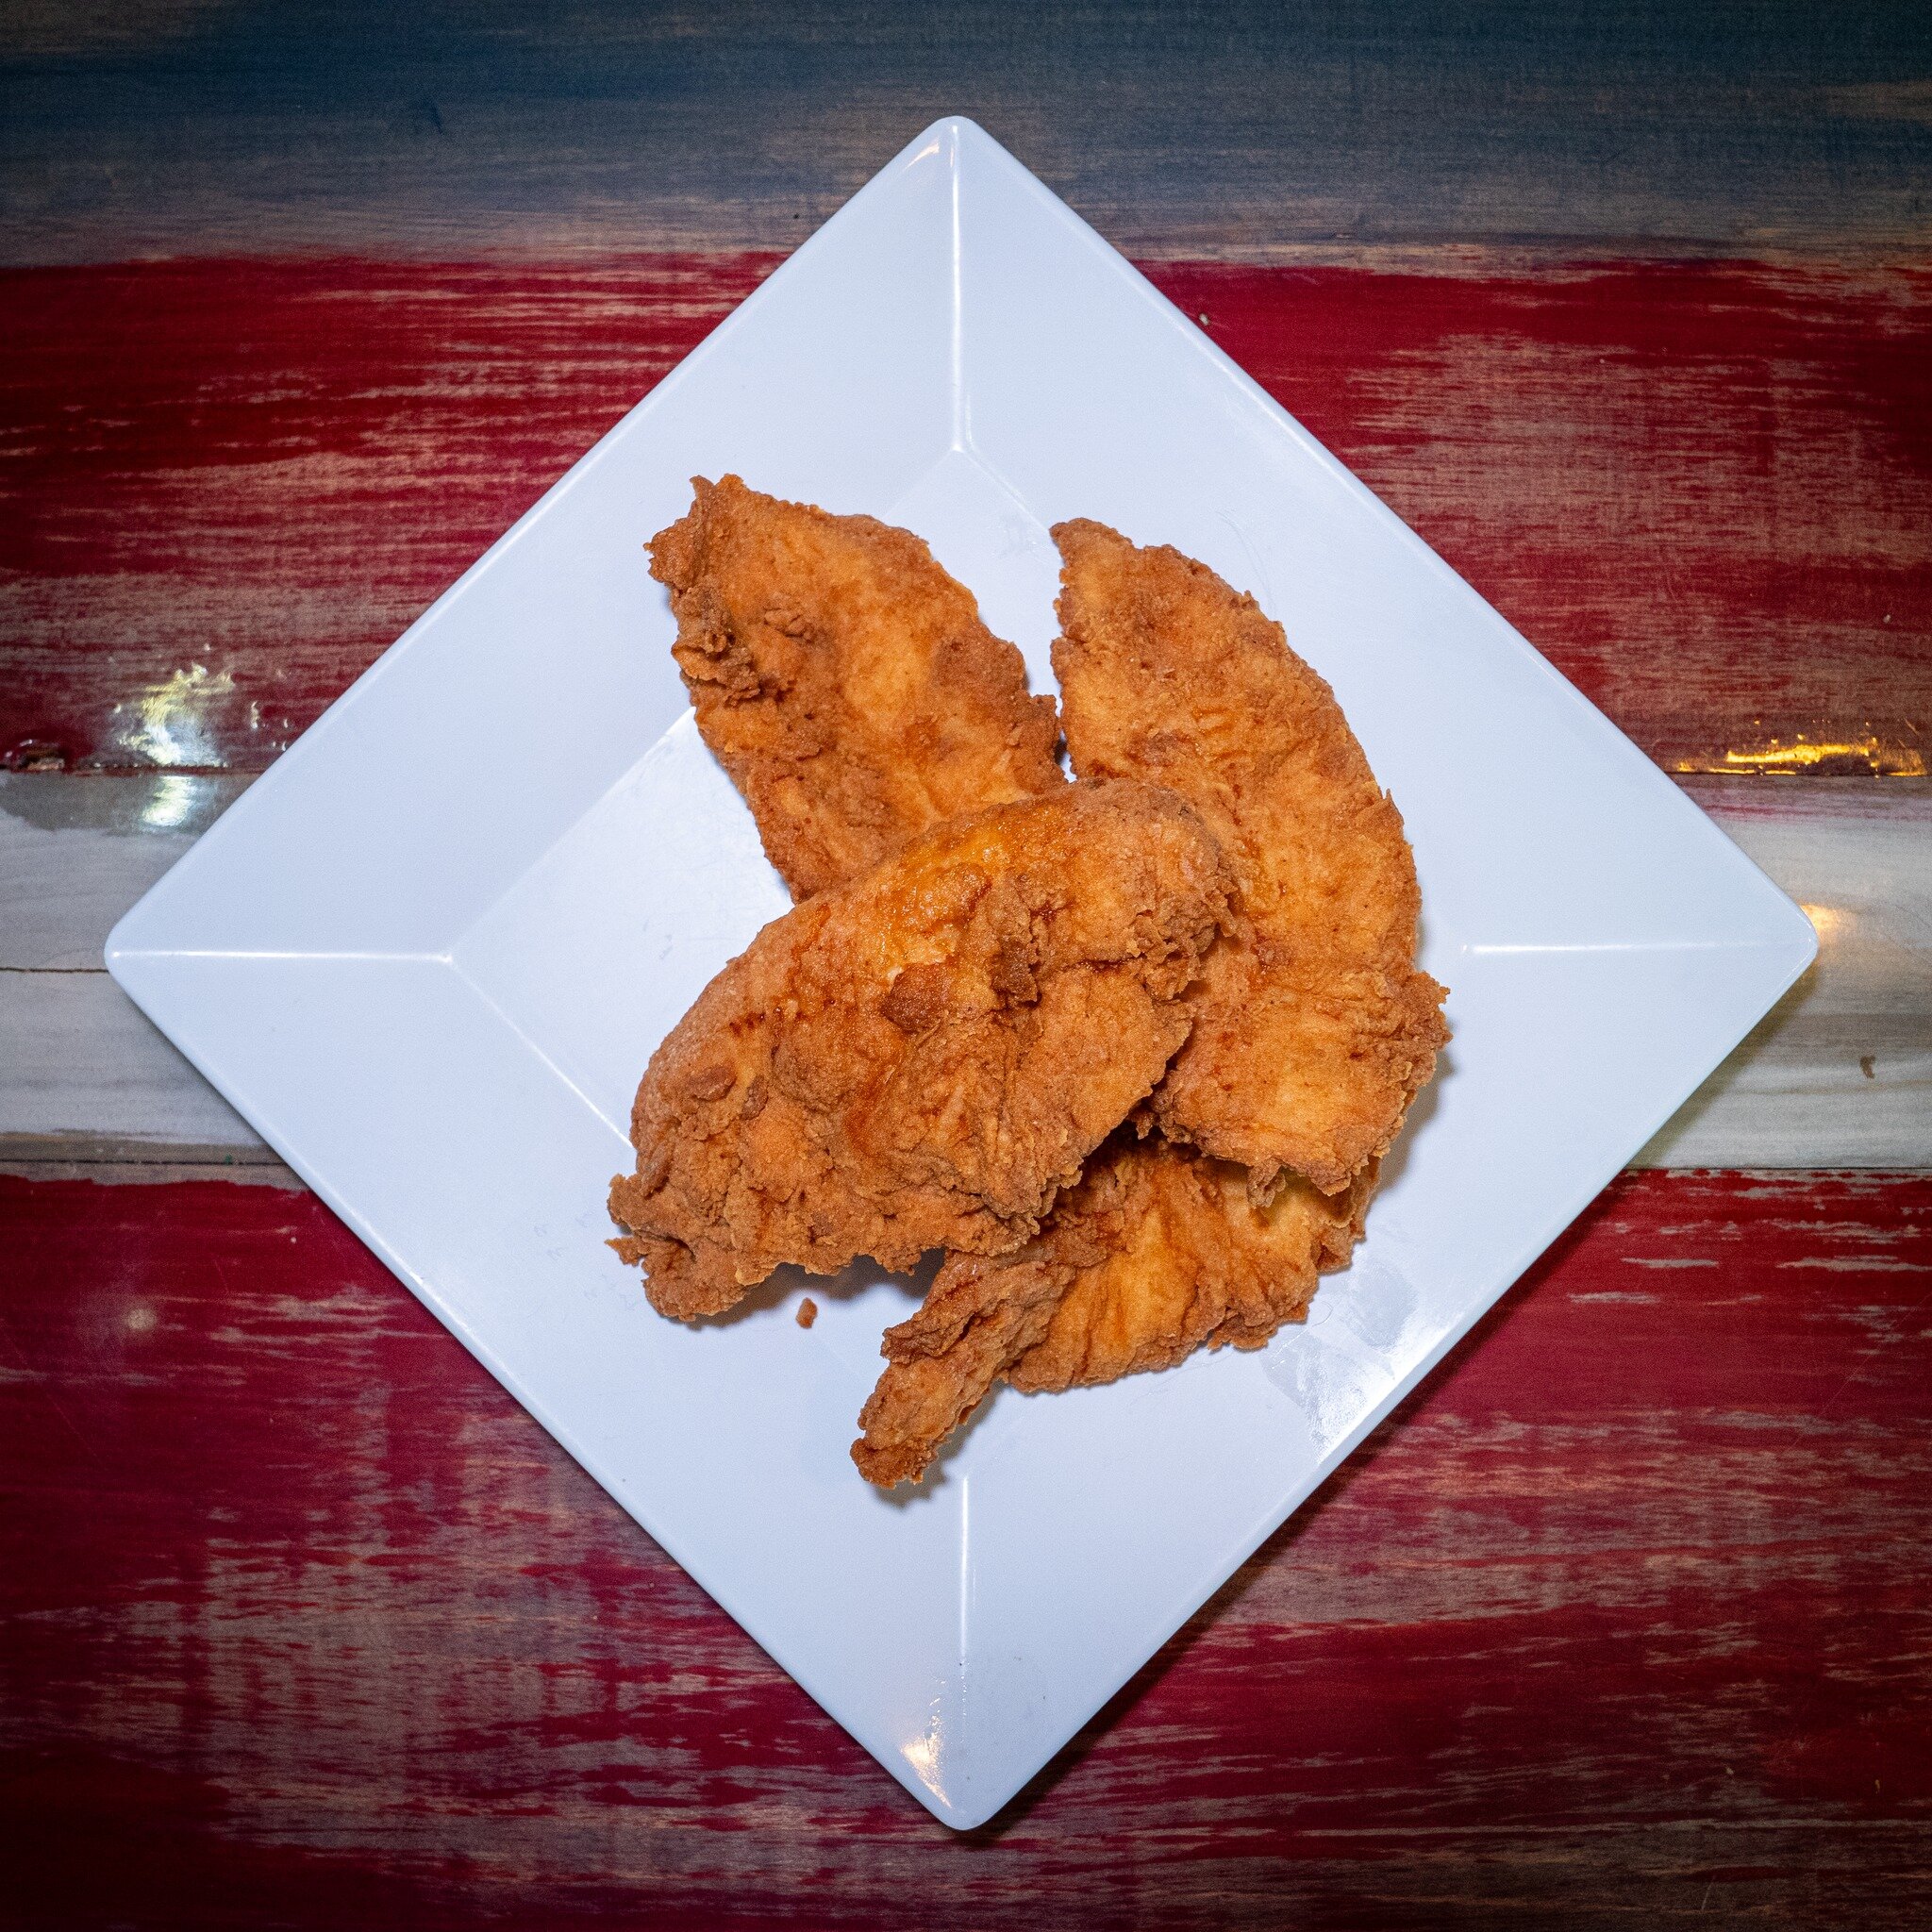 Enjoy the crispy taste of our Chicken Tenders while dipping them in our wide selection of sauces like Mango Habanero, Garlic Parmesan, Nashville Hot, and others!